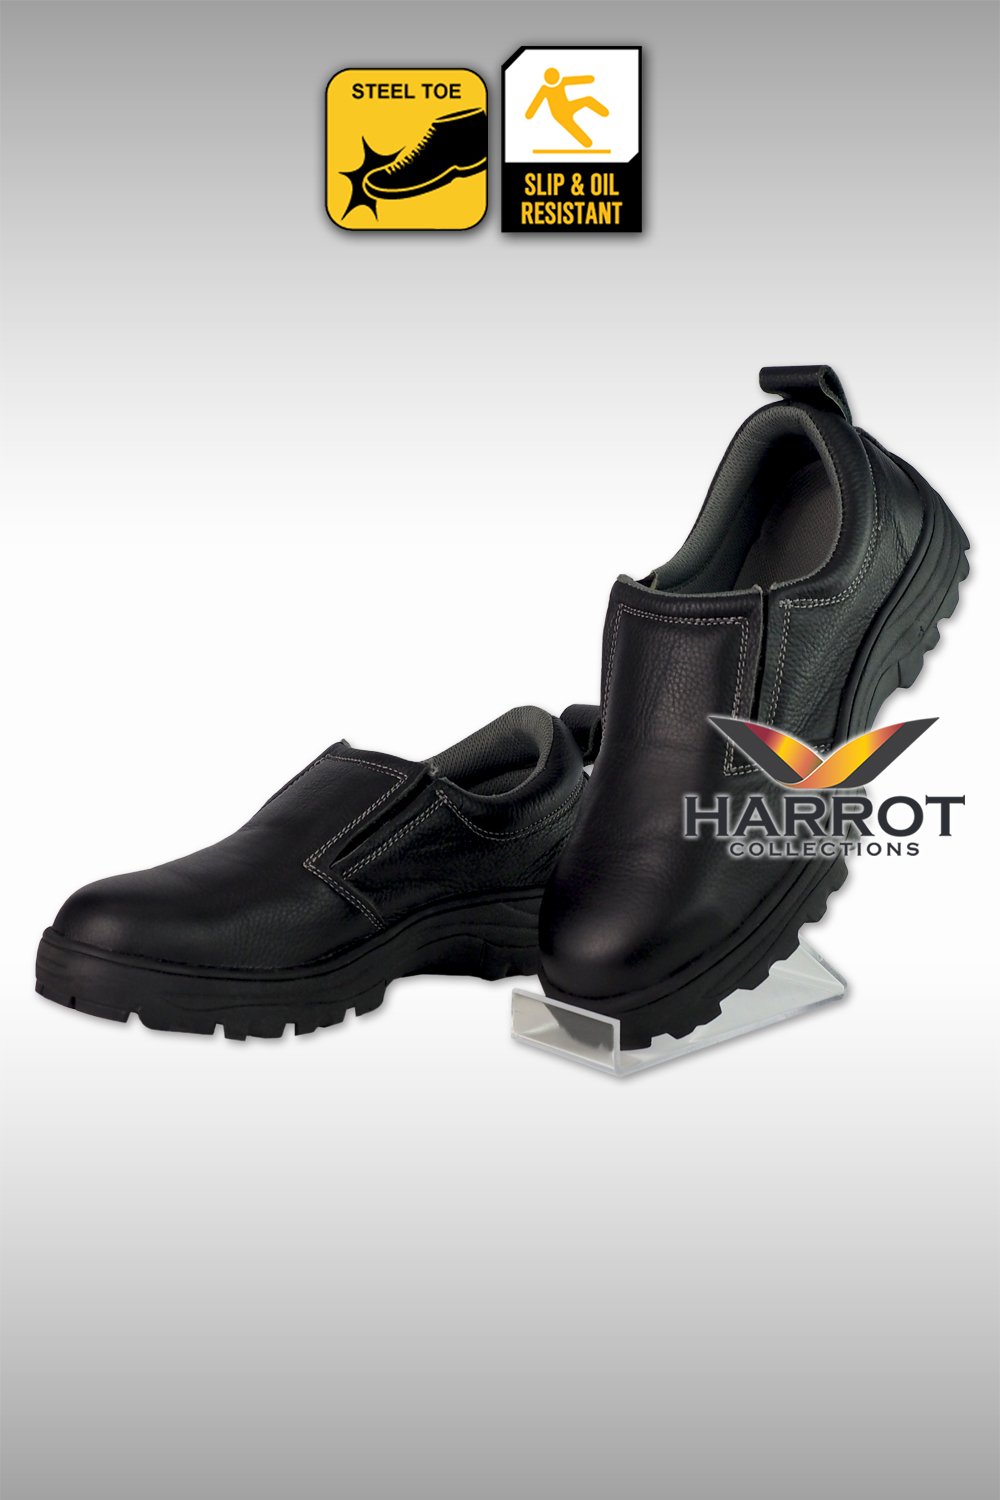 Chef safety slip on shoes with steel toe